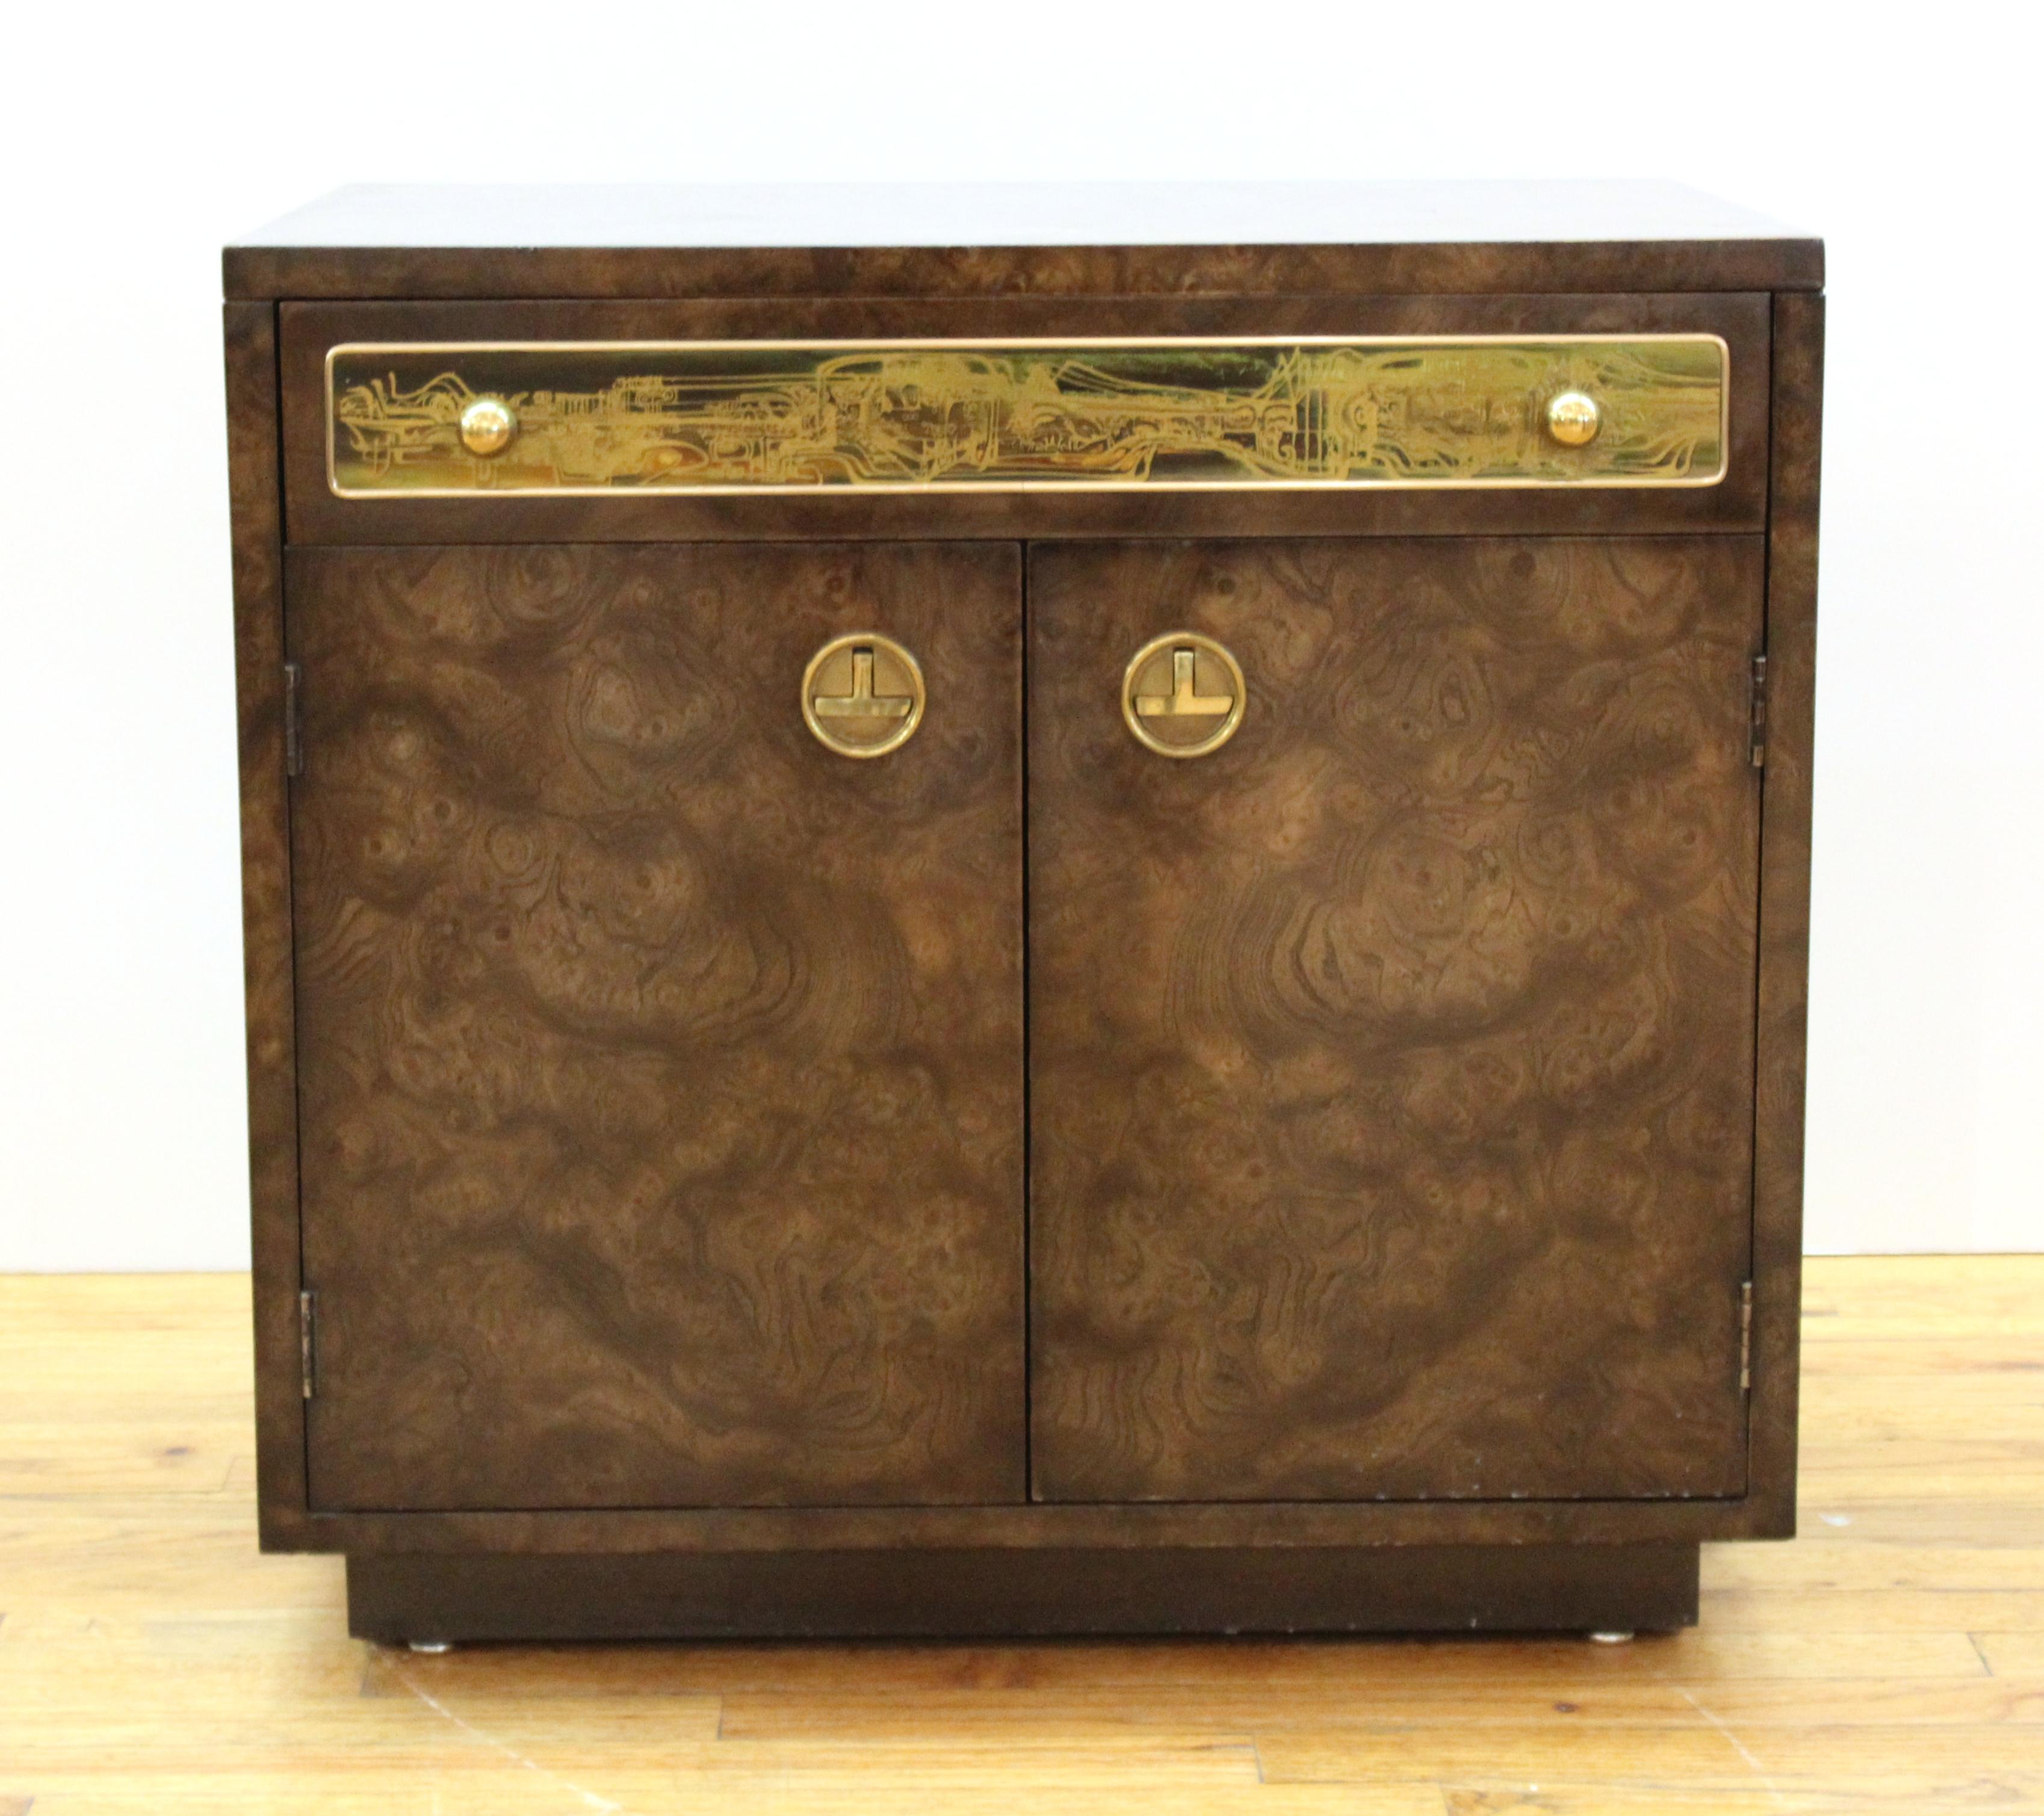 Mid-Century Modern pair of nightstands in burl wood with acid etched brass panel detailing, made by Mastercraft in the 1970's. In great vintage condition with age-appropriate wear and use.
Can be sold individually at $2800 each.